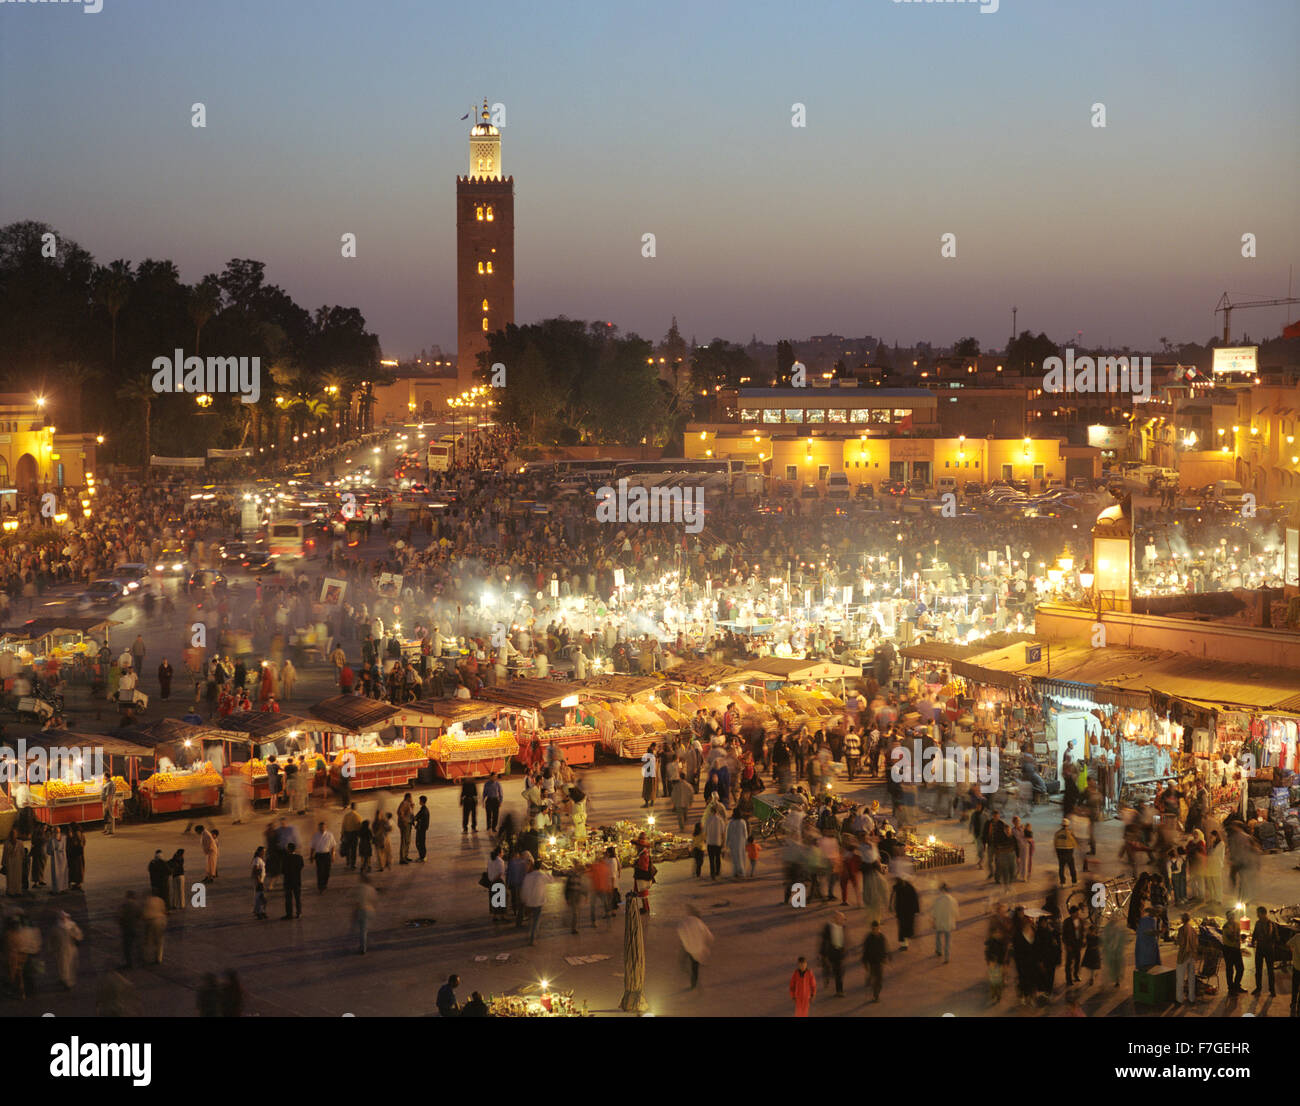 A view of food stalls in the marketplace and public square Place Jema al Fna in Marrakech at dusk. Marrakech, Morocco Stock Photo